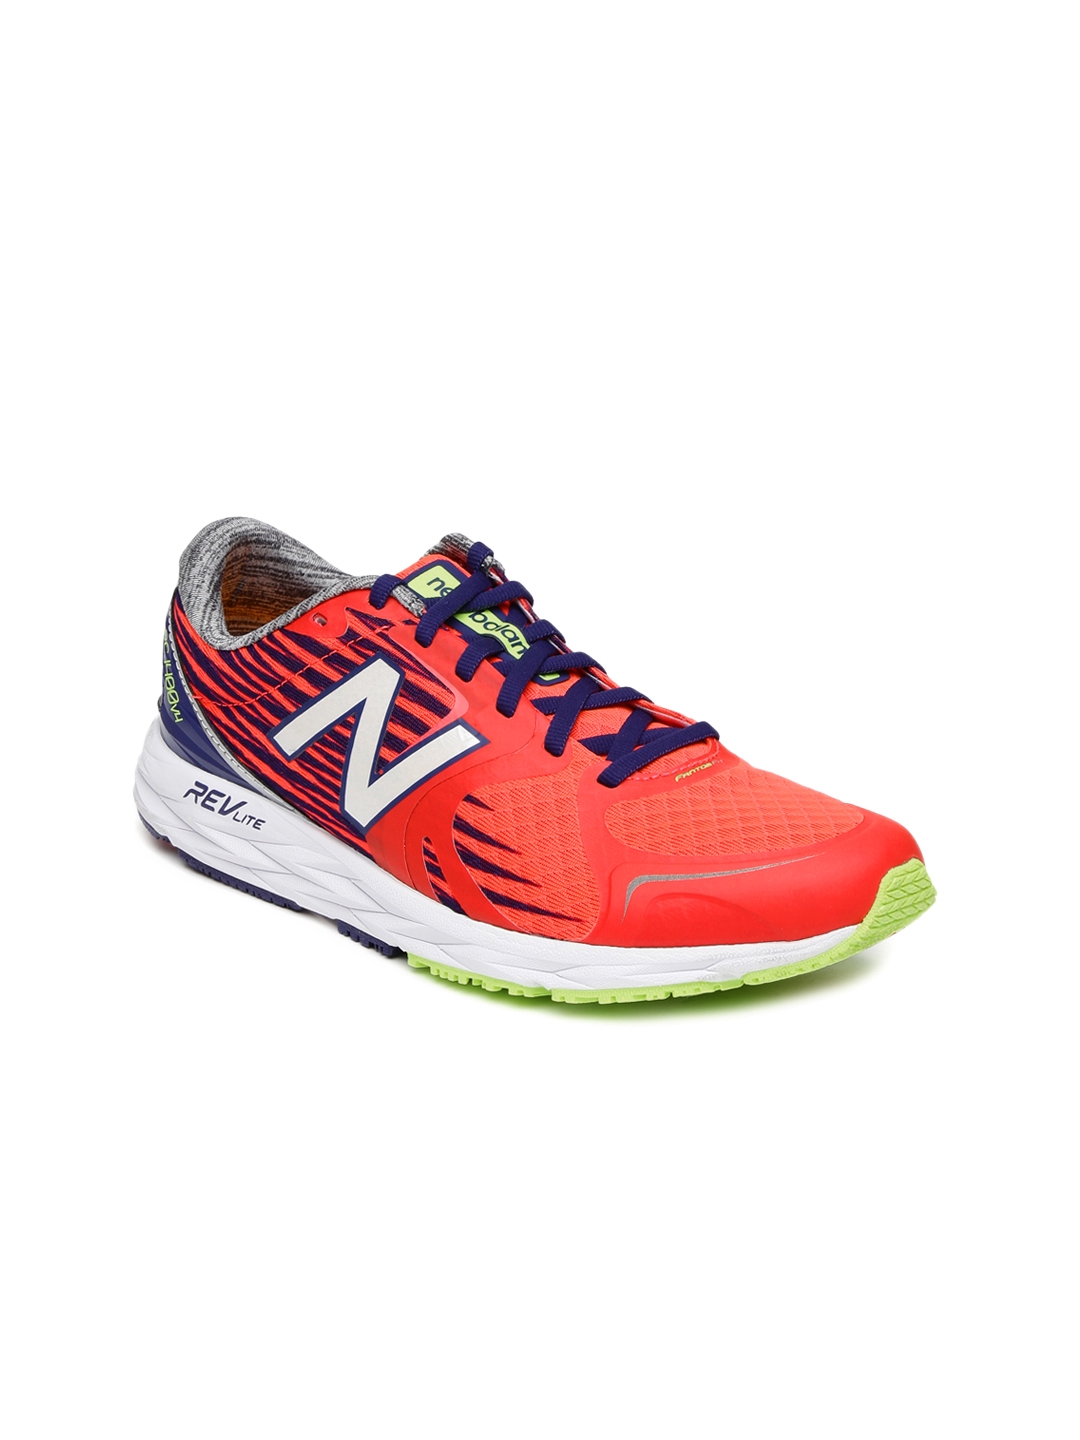 Buy New Balance Women W1400PW4 Orange Running Shoes - Sports Shoes for ...